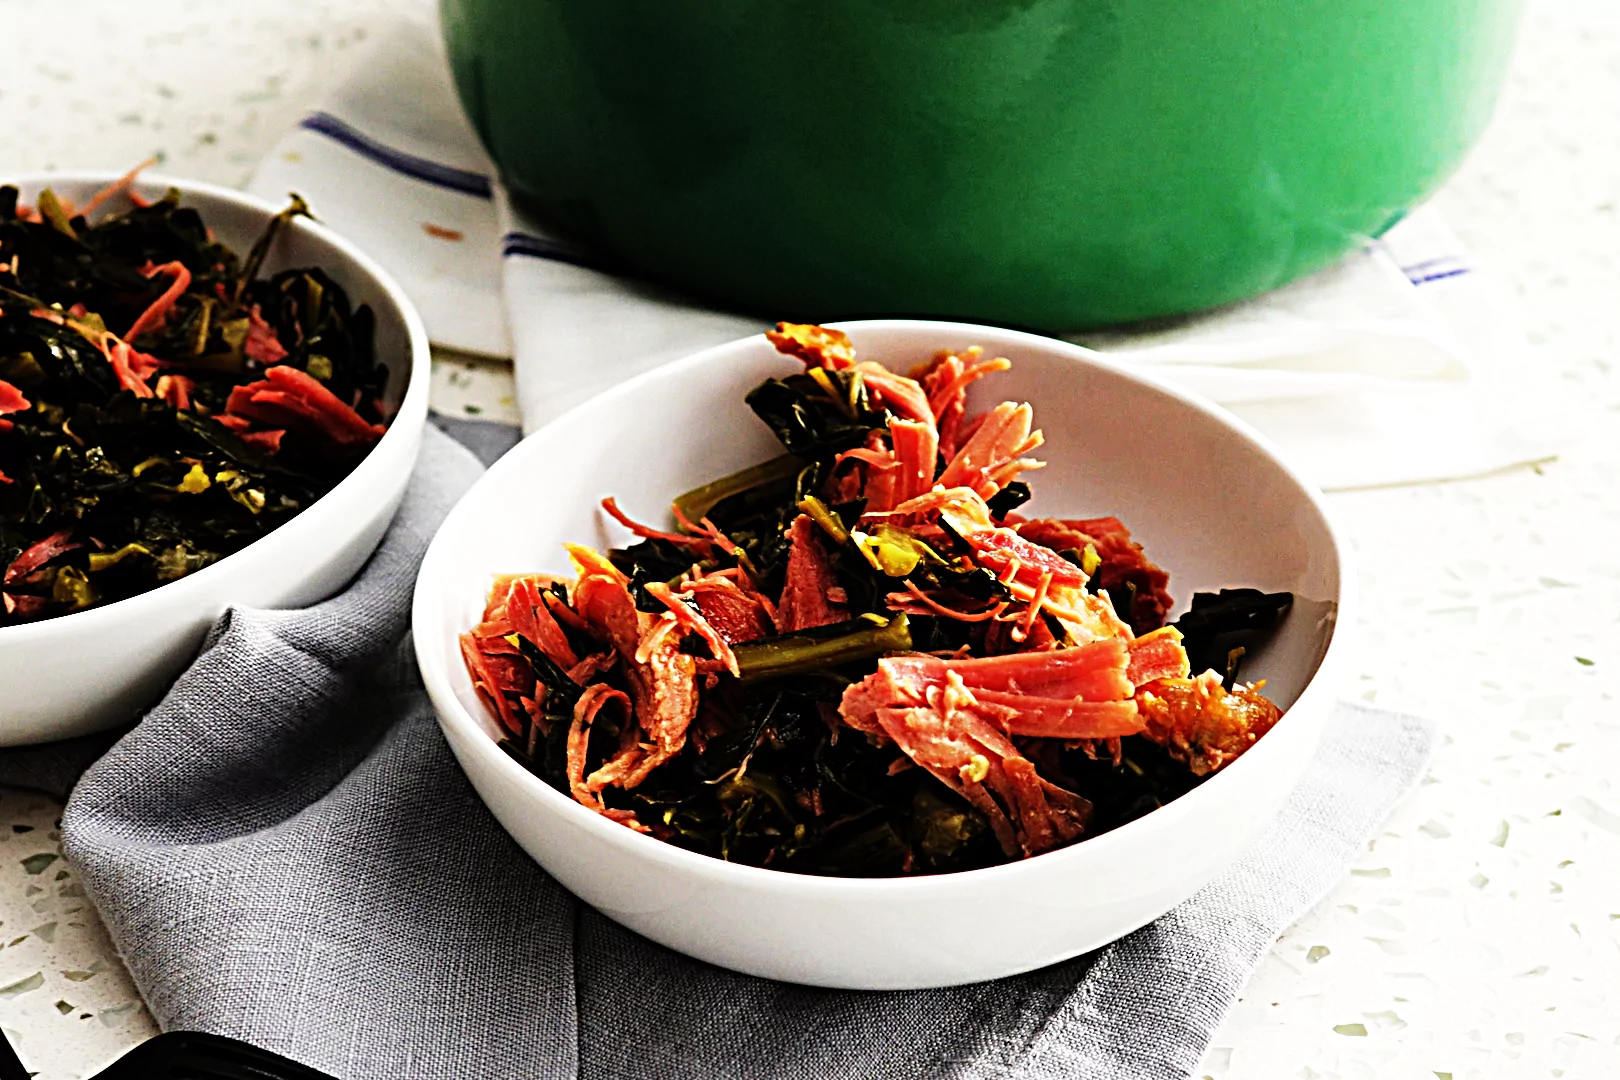 Stupid-Easy Recipe for Oven-Baked Collard Greens with Smoked Turkey (#1 Top-Rated)